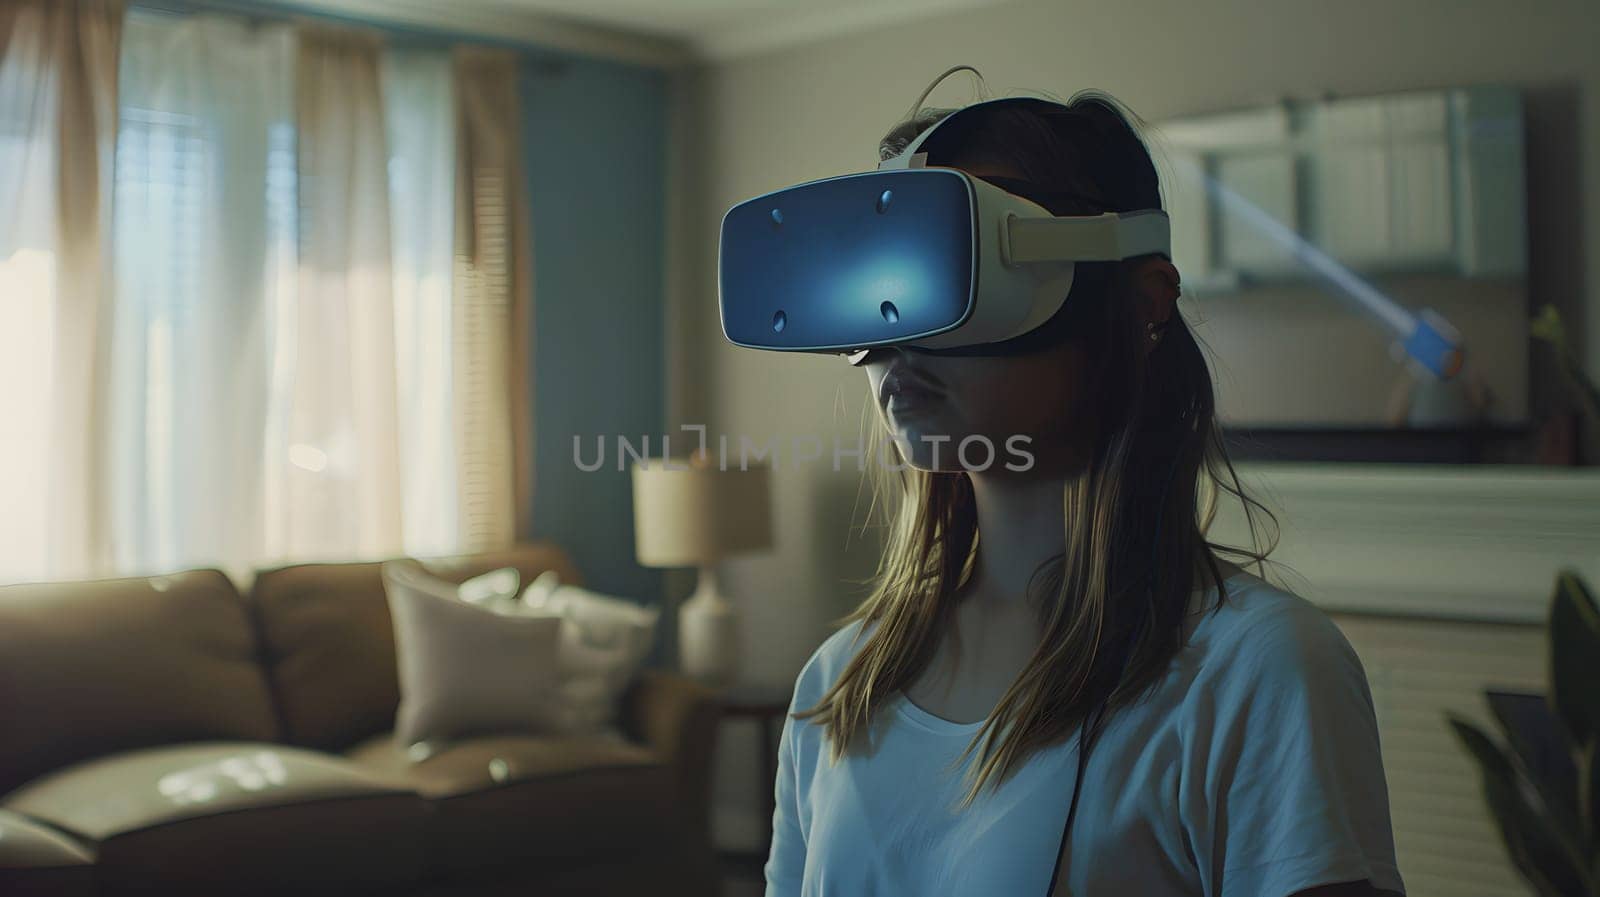 A woman is in a living room wearing a virtual reality helmet, surrounded by a couch, window, and curtain. She looks immersed in an event through her eyewear